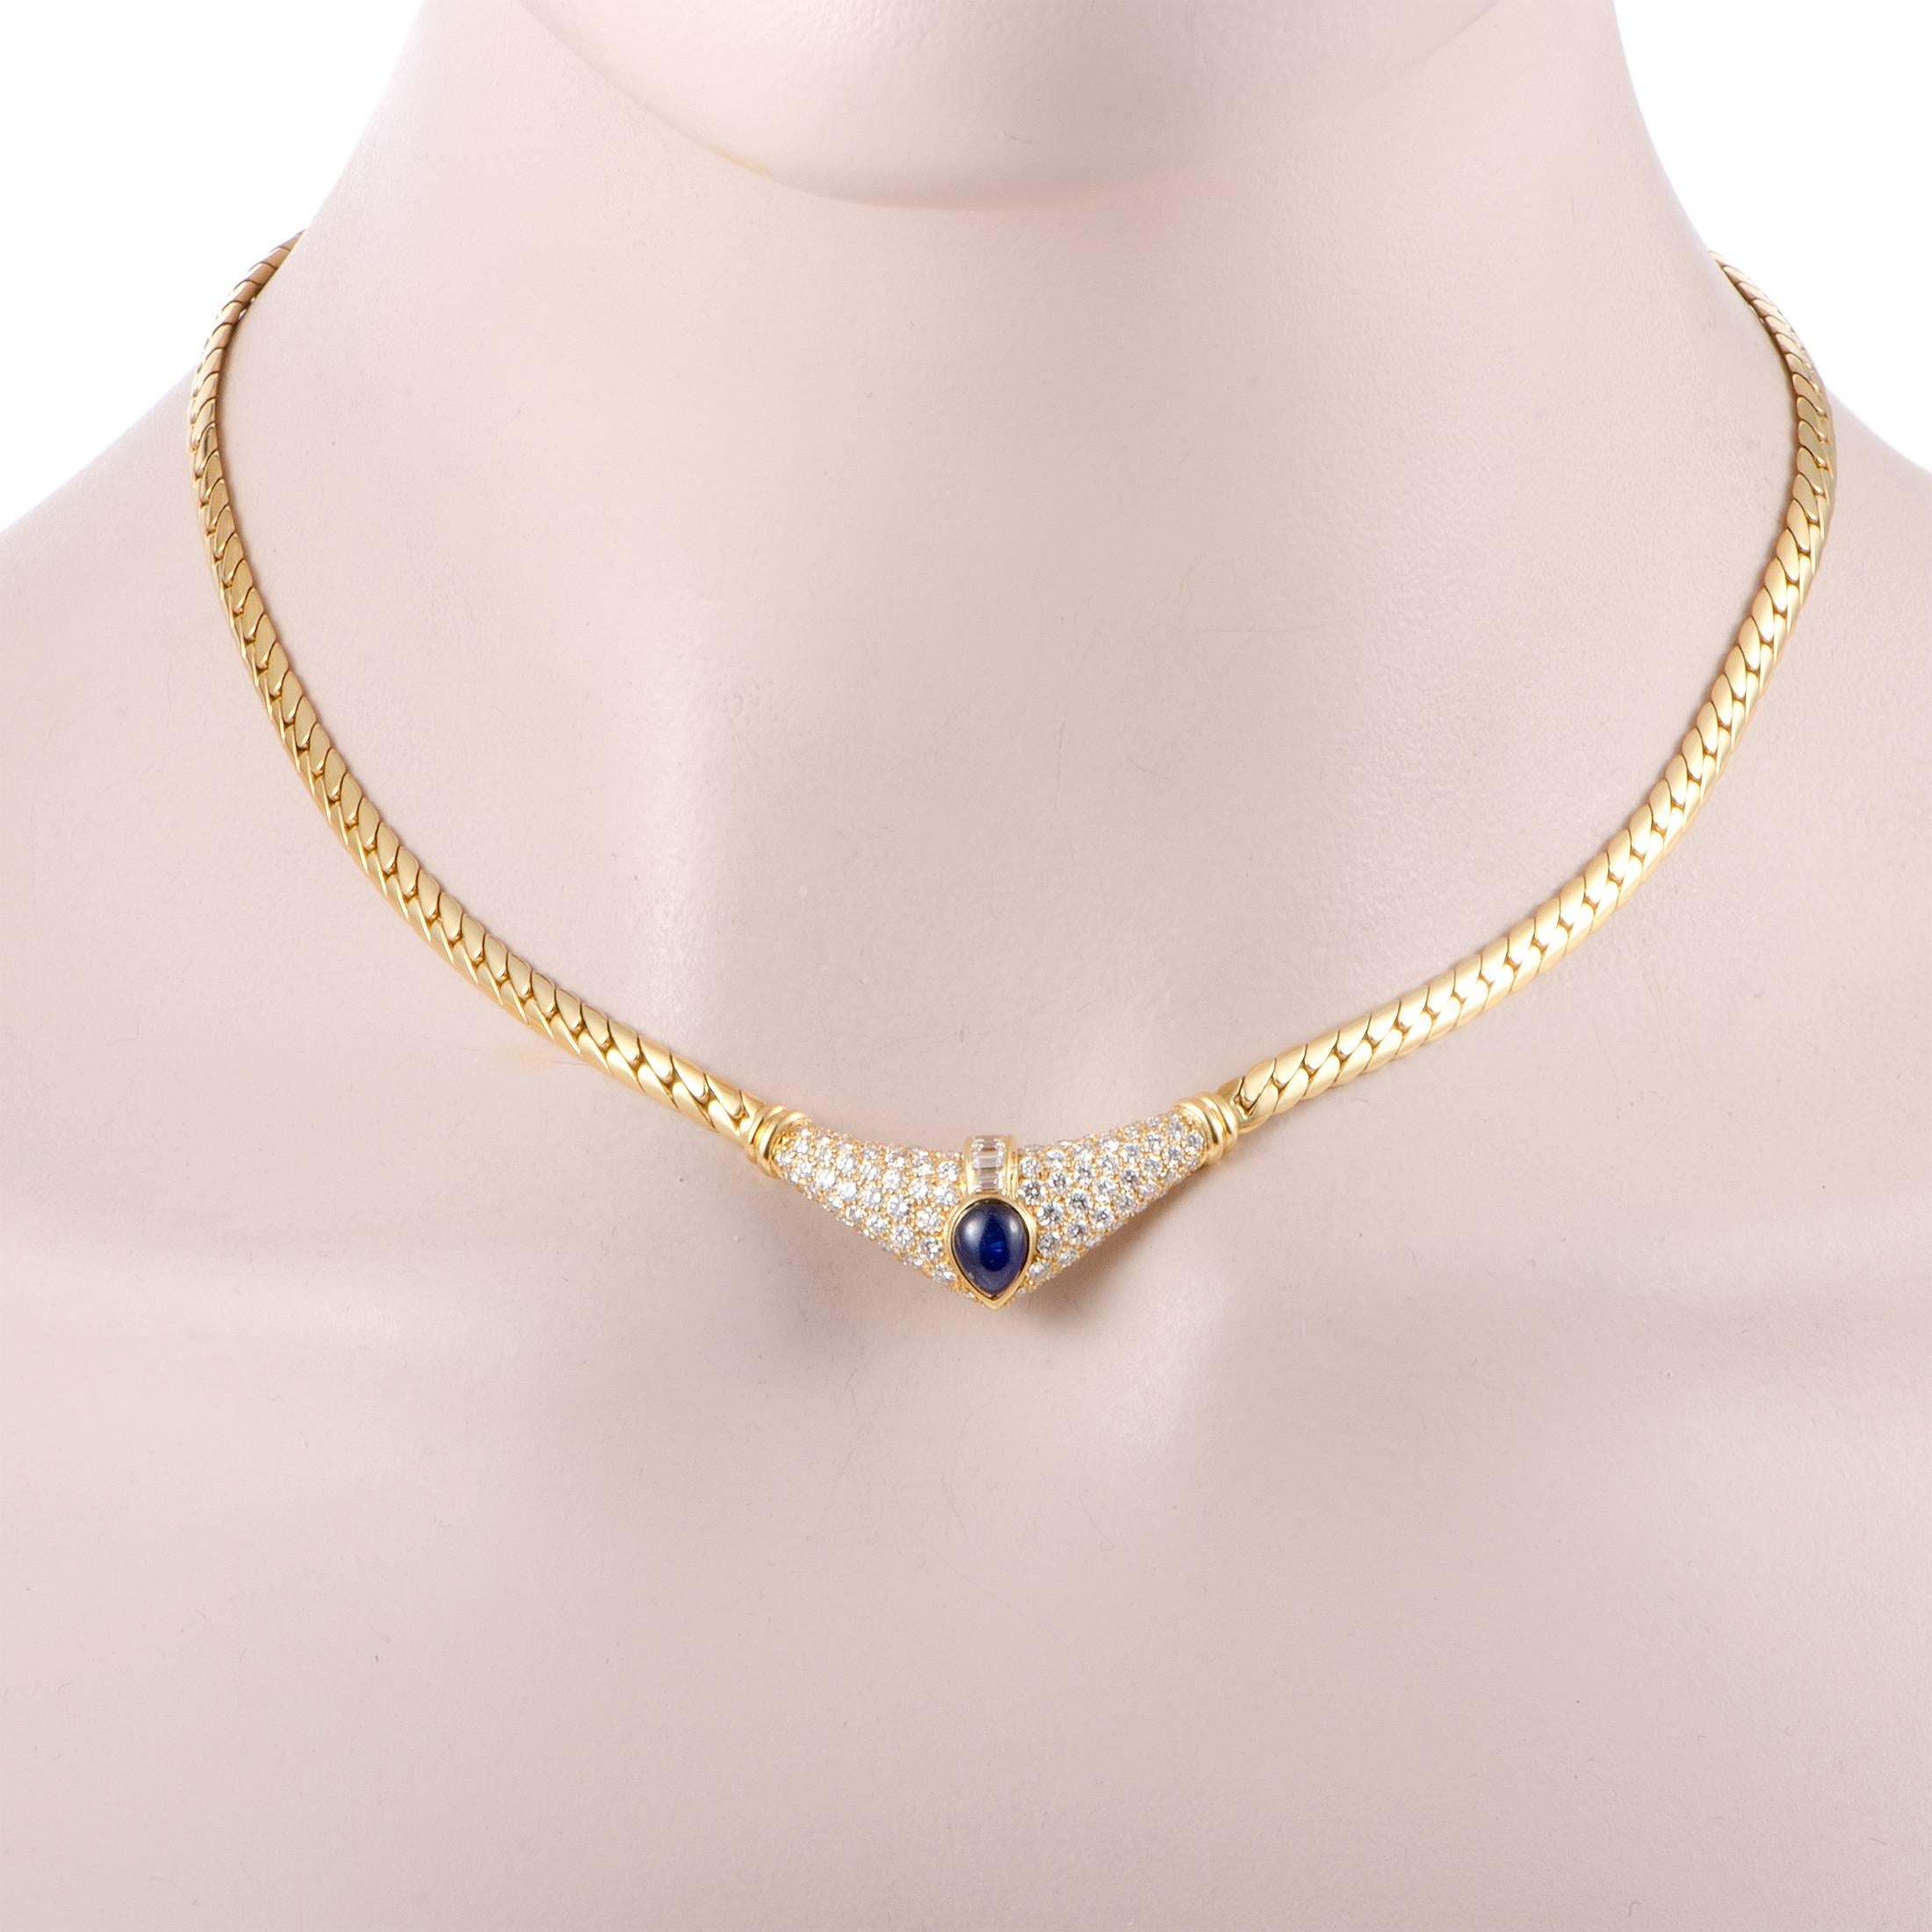 With a design distinctly reminiscent of antique jewelry pieces that compel with their timeless allure and opulent décor, this ravishing necklace from Cartier will accentuate your look in an exceptionally classy manner. Beautifully made of alluring